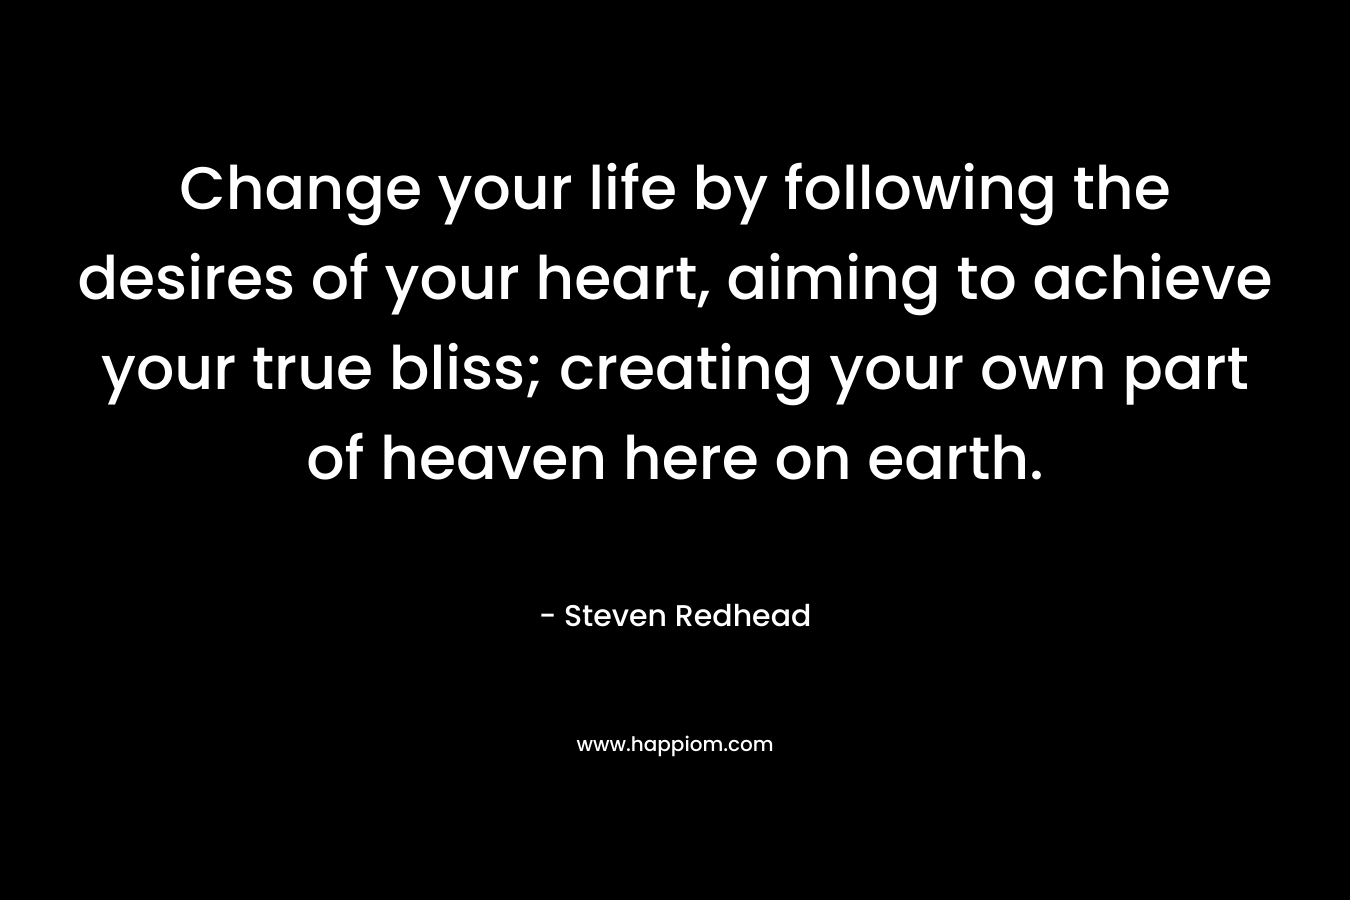 Change your life by following the desires of your heart, aiming to achieve your true bliss; creating your own part of heaven here on earth.